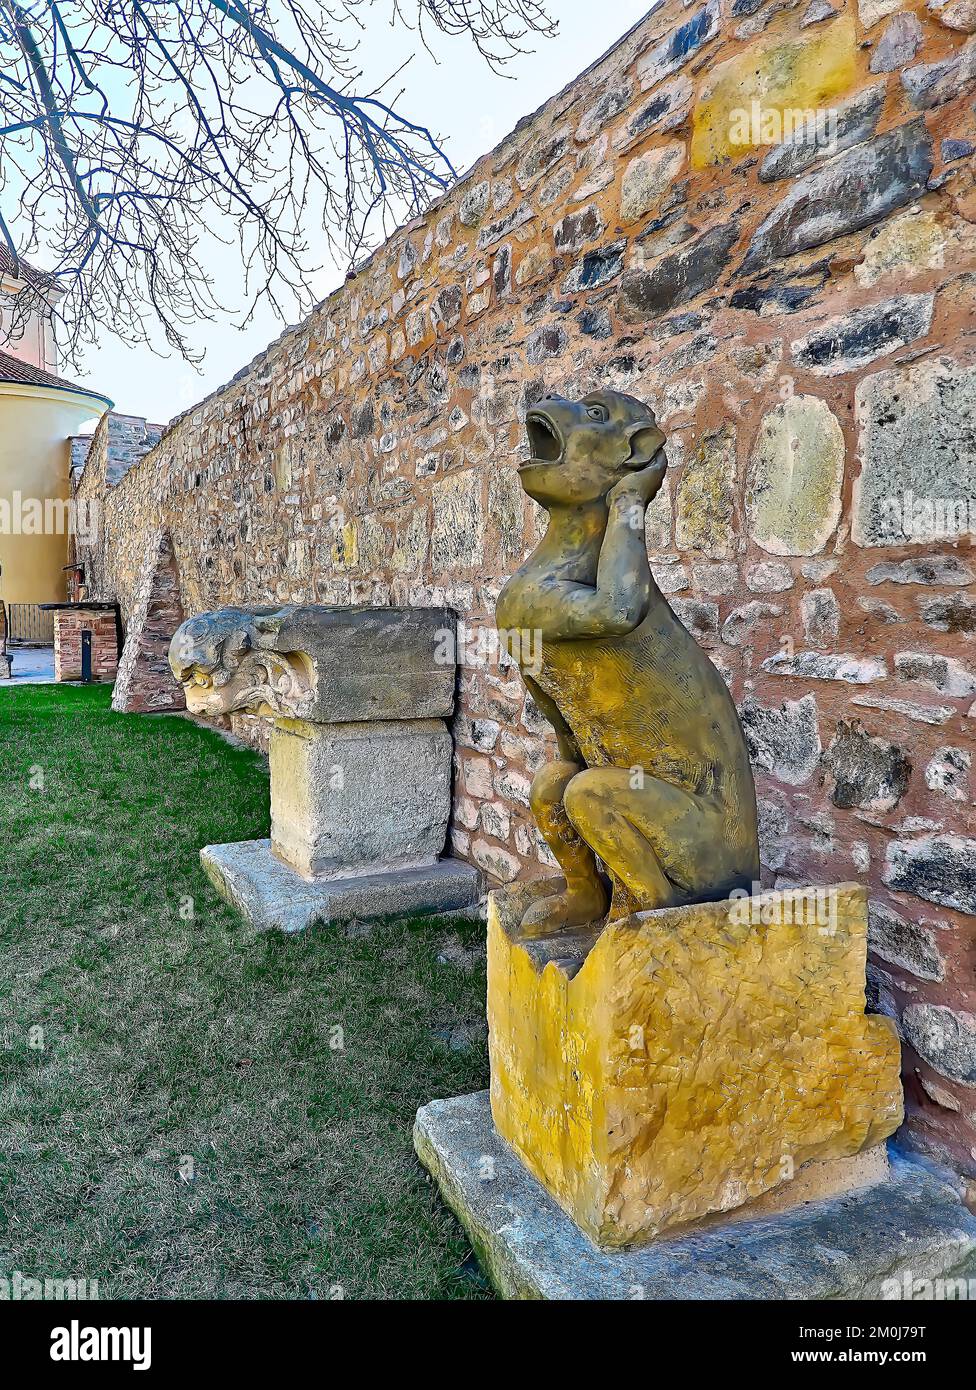 The courtyard of St Bartholomew Parish Church with preserved sculptures of gargoyles against the old stone wall, Kolin, Czech Republic Stock Photo